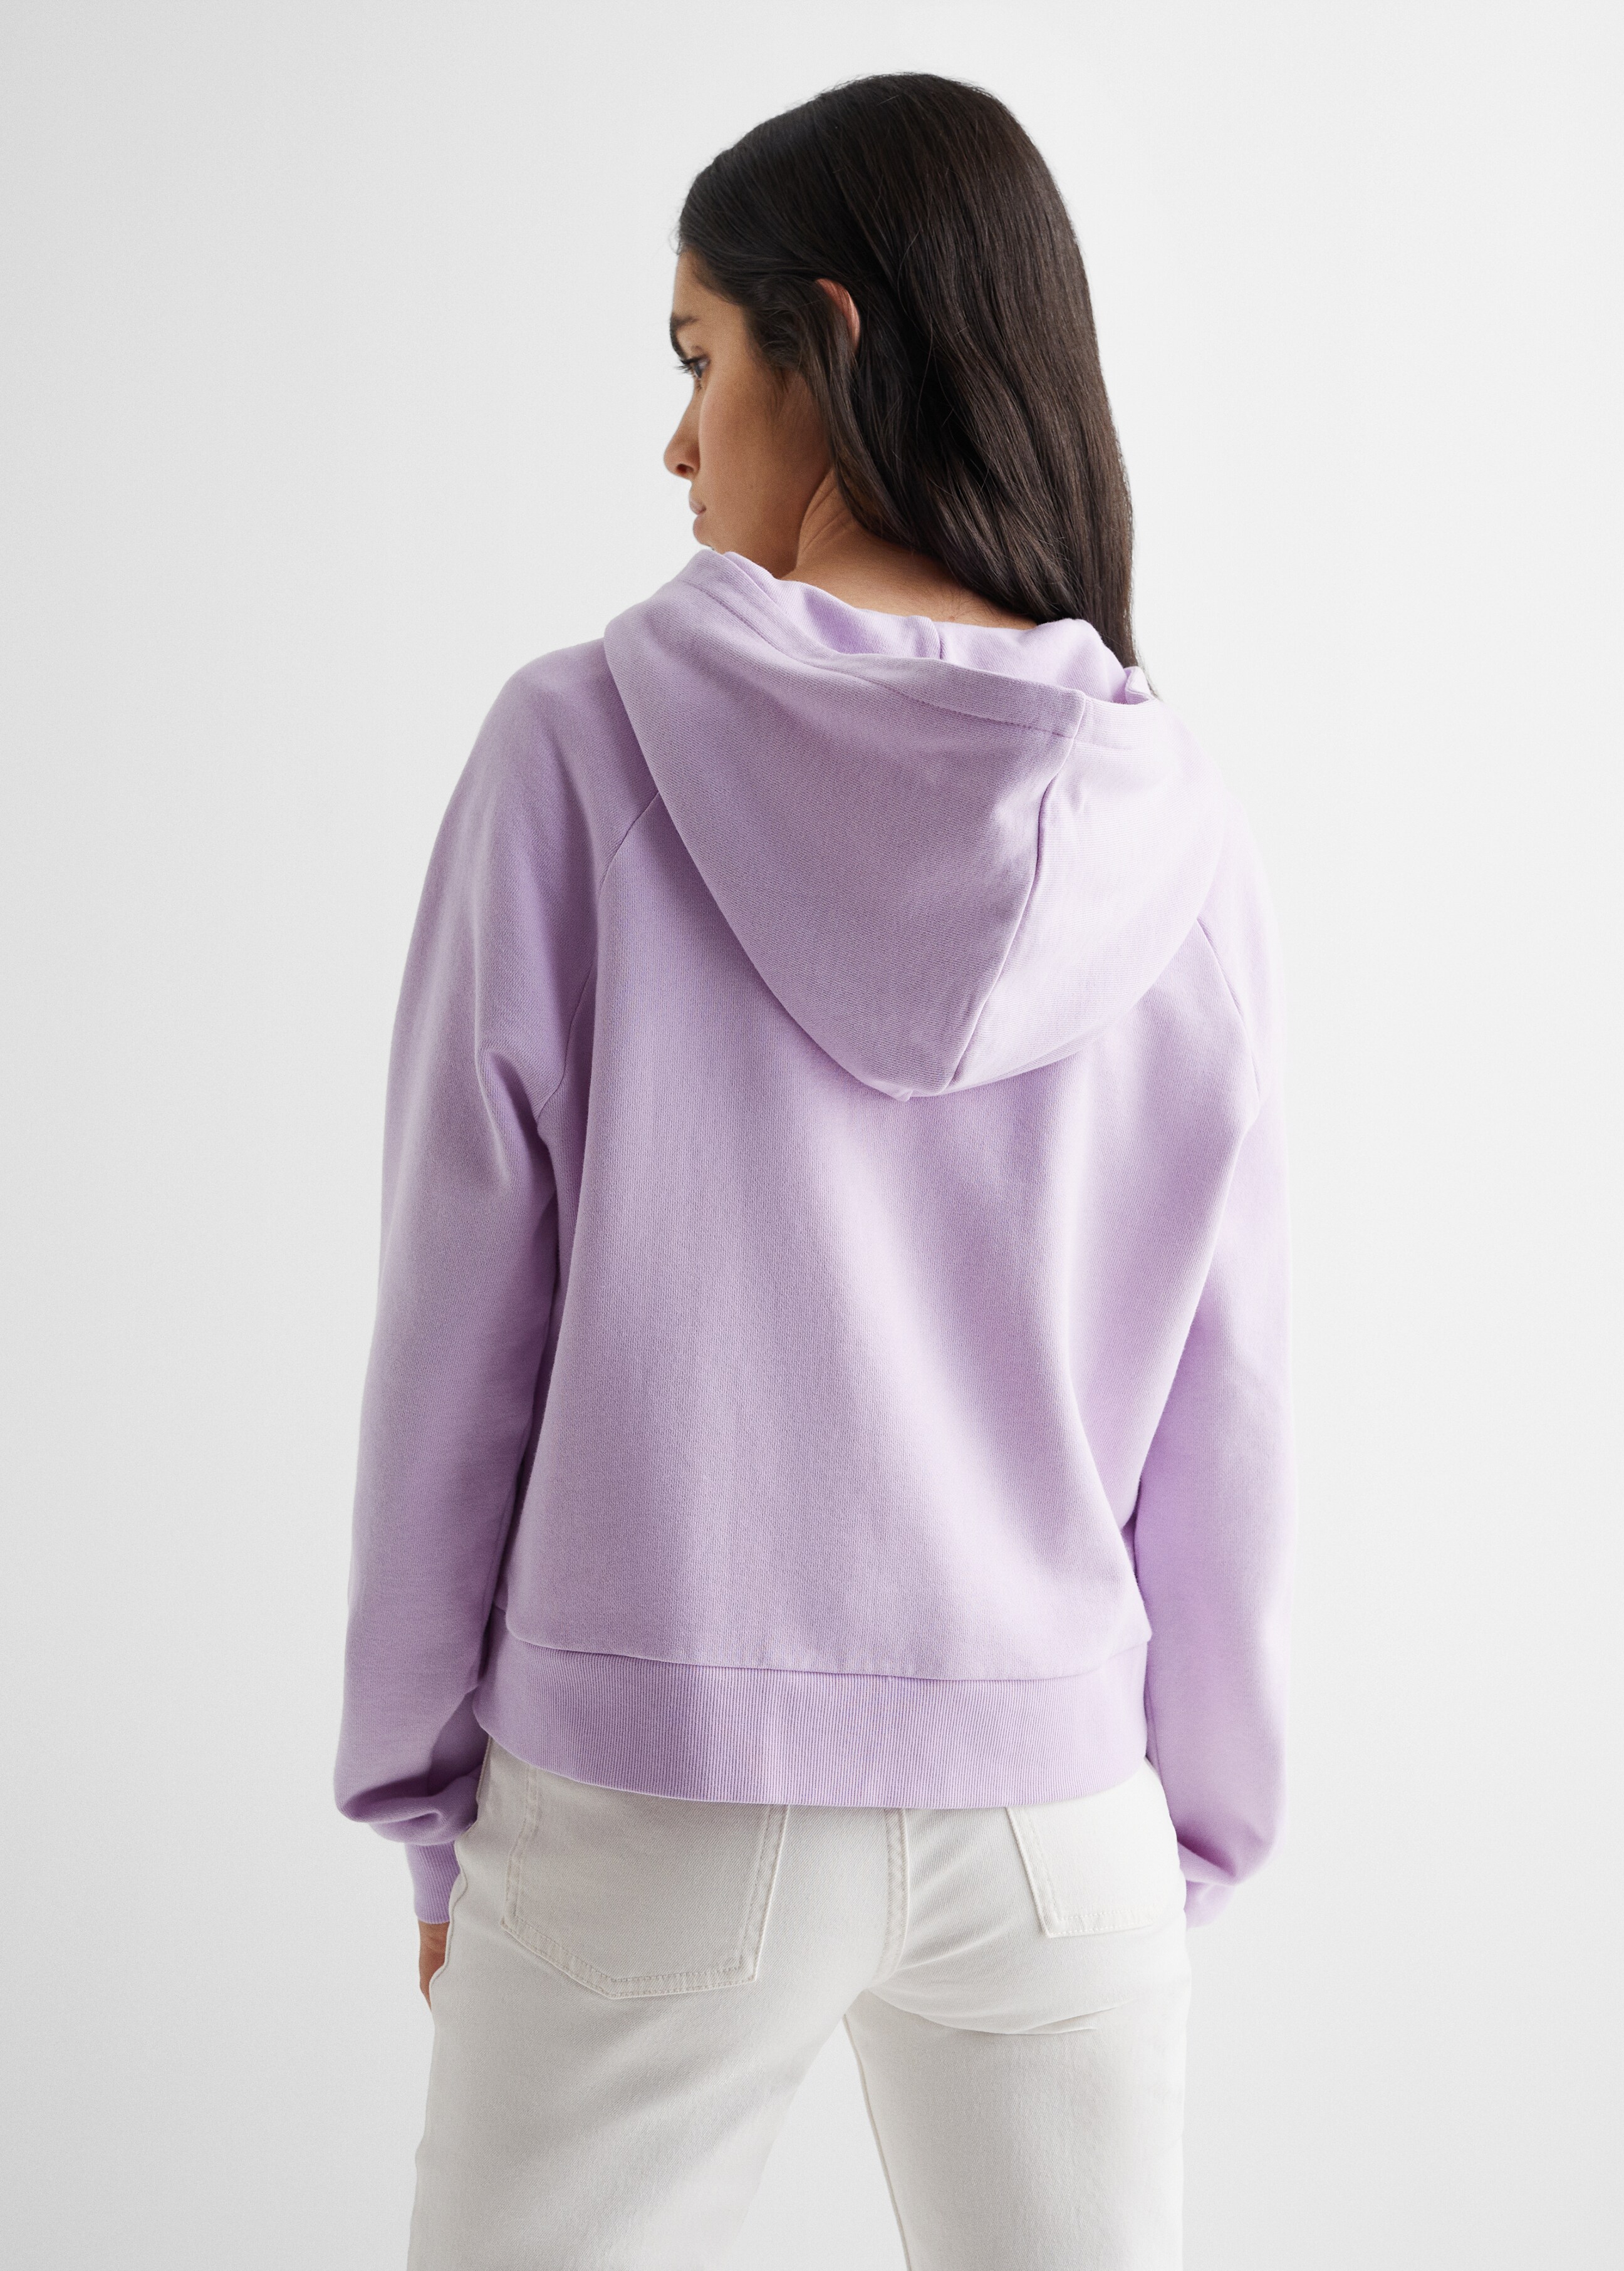 Embroidered cotton sweatshirt - Reverse of the article